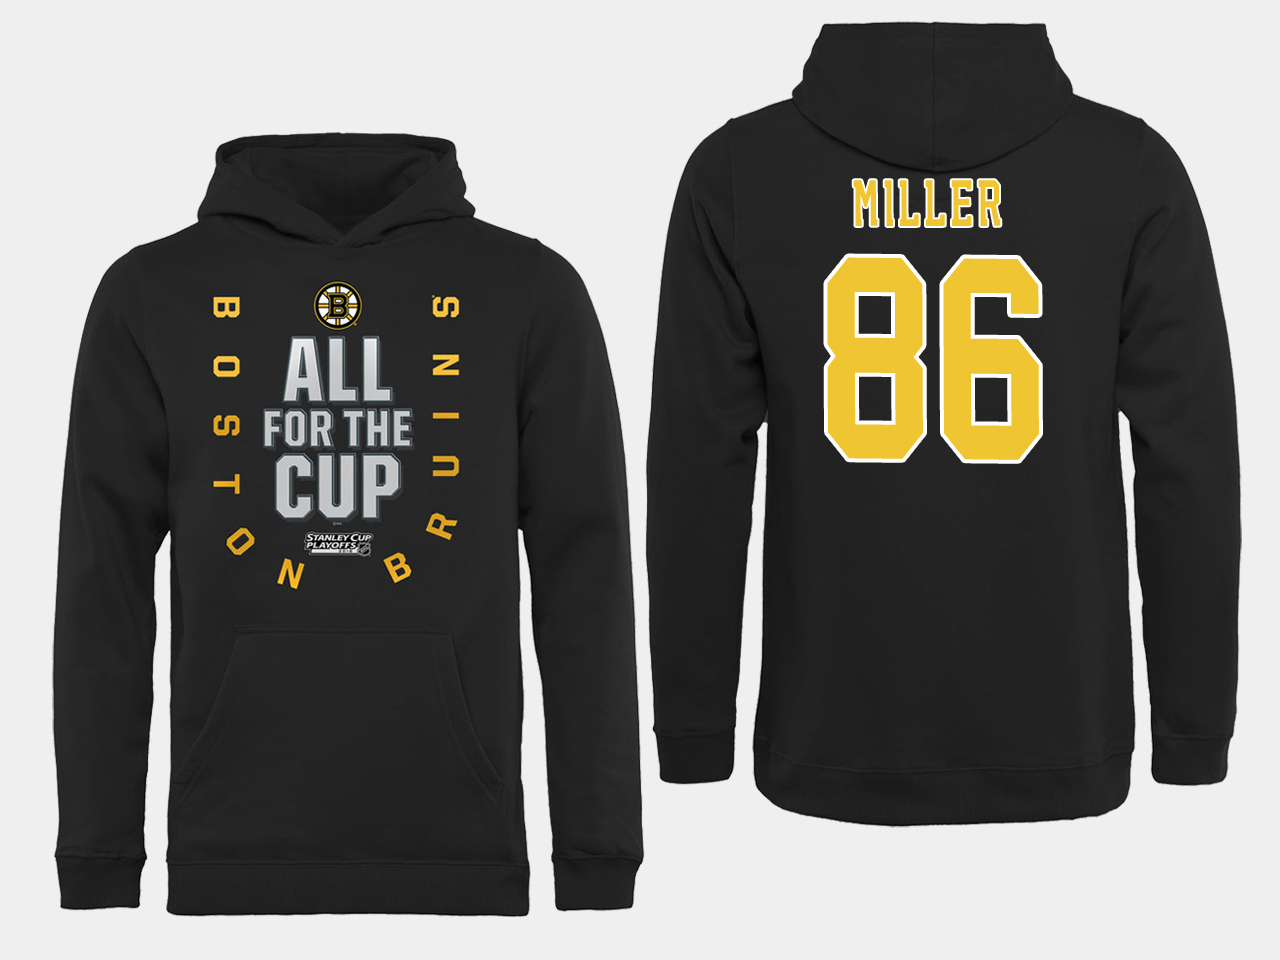 NHL Men Boston Bruins #86 Miller Black All for the Cup Hoodie->boston bruins->NHL Jersey